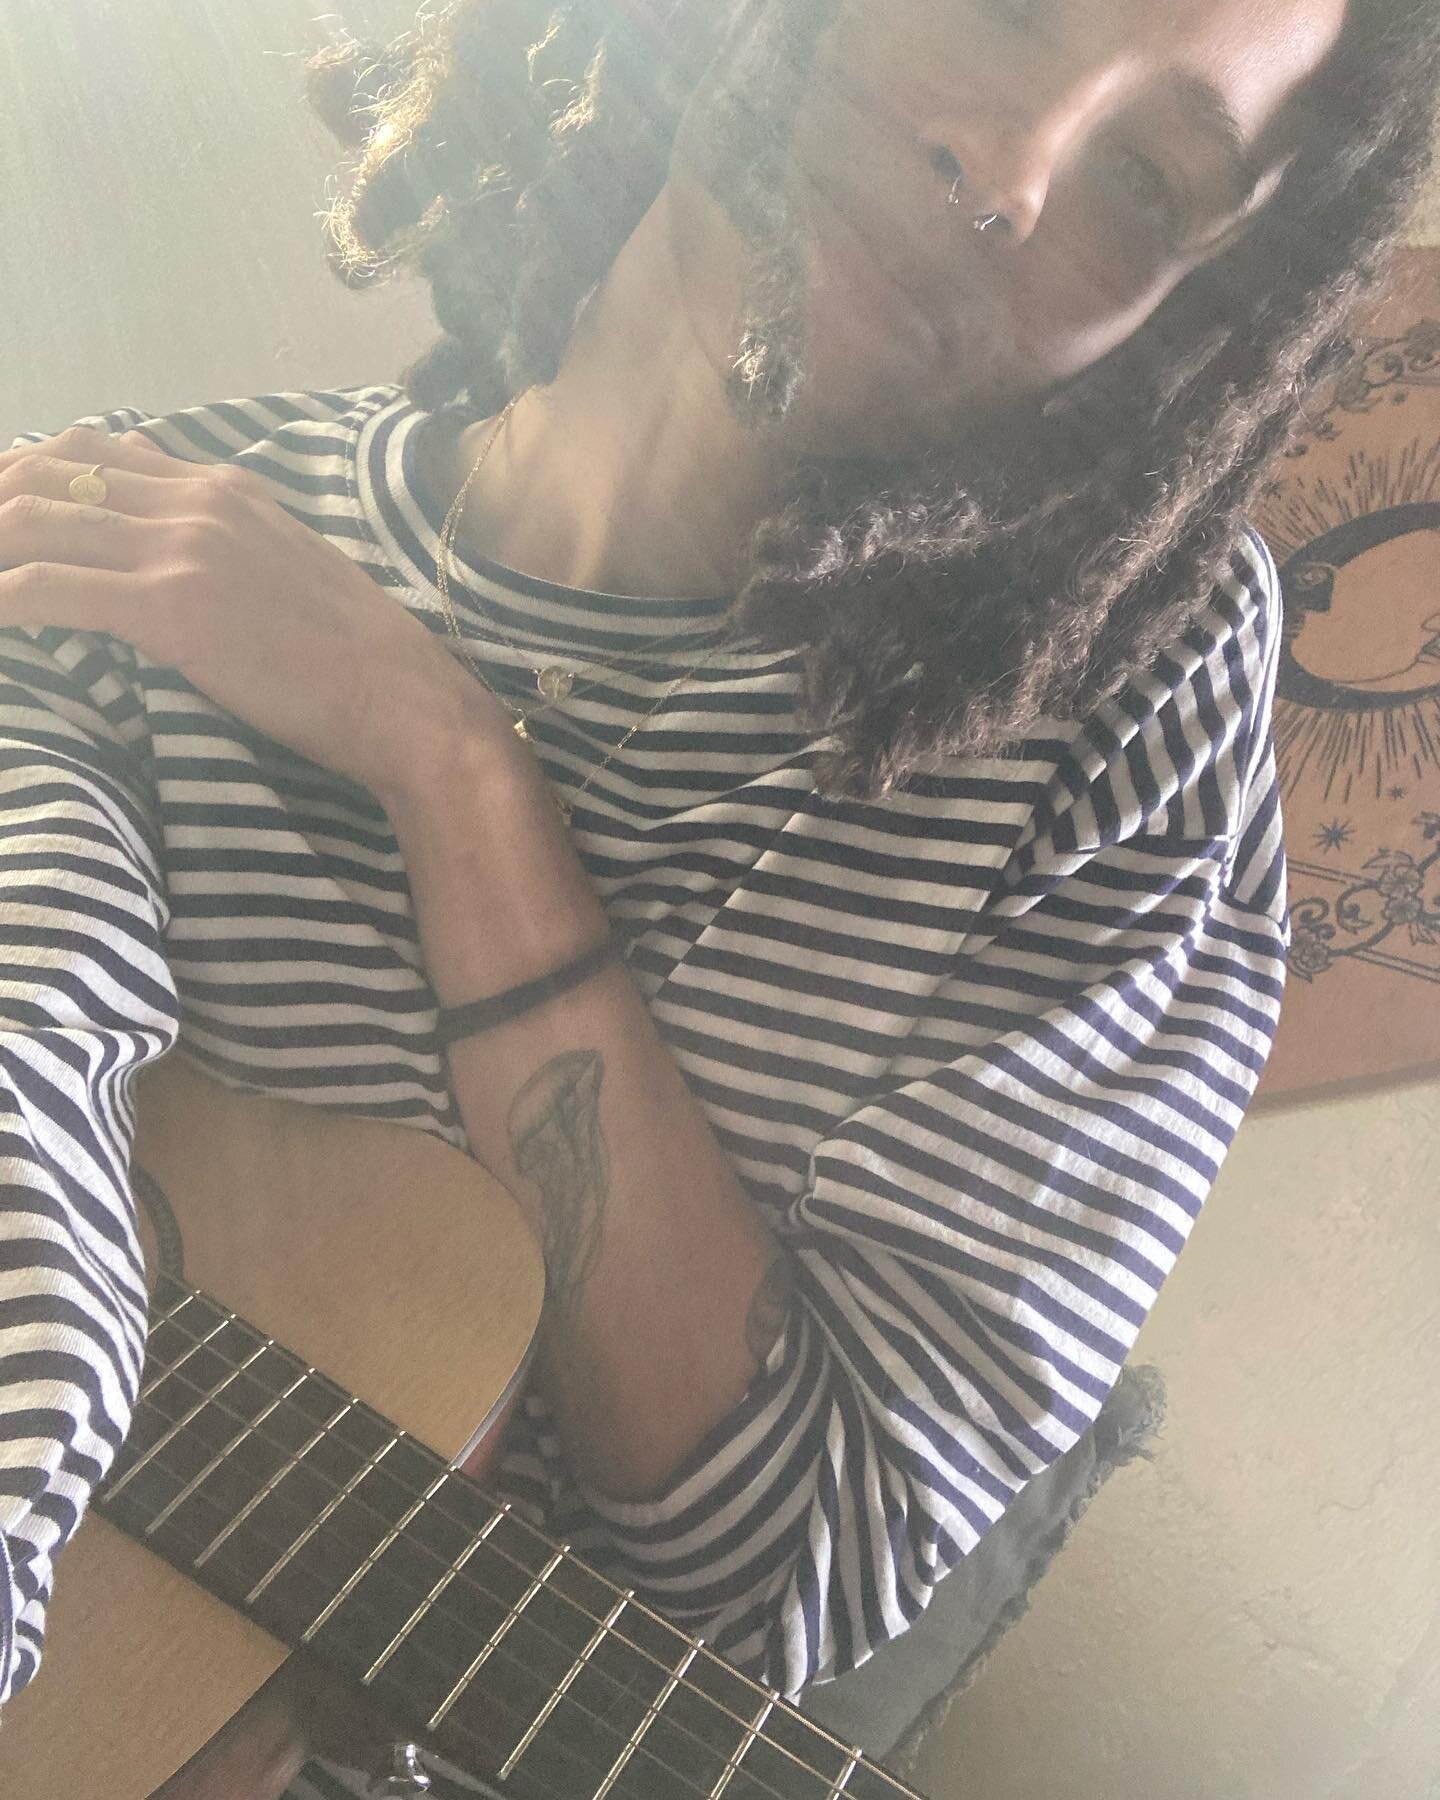 Life has been really cool and bizarre and silly and sweet. I&rsquo;m writing a lot and trying new things and revisiting old things too. 

I&rsquo;ve been in Denver for a month. I&rsquo;m re-entering my striped shirt era. And I&rsquo;m very much in lo